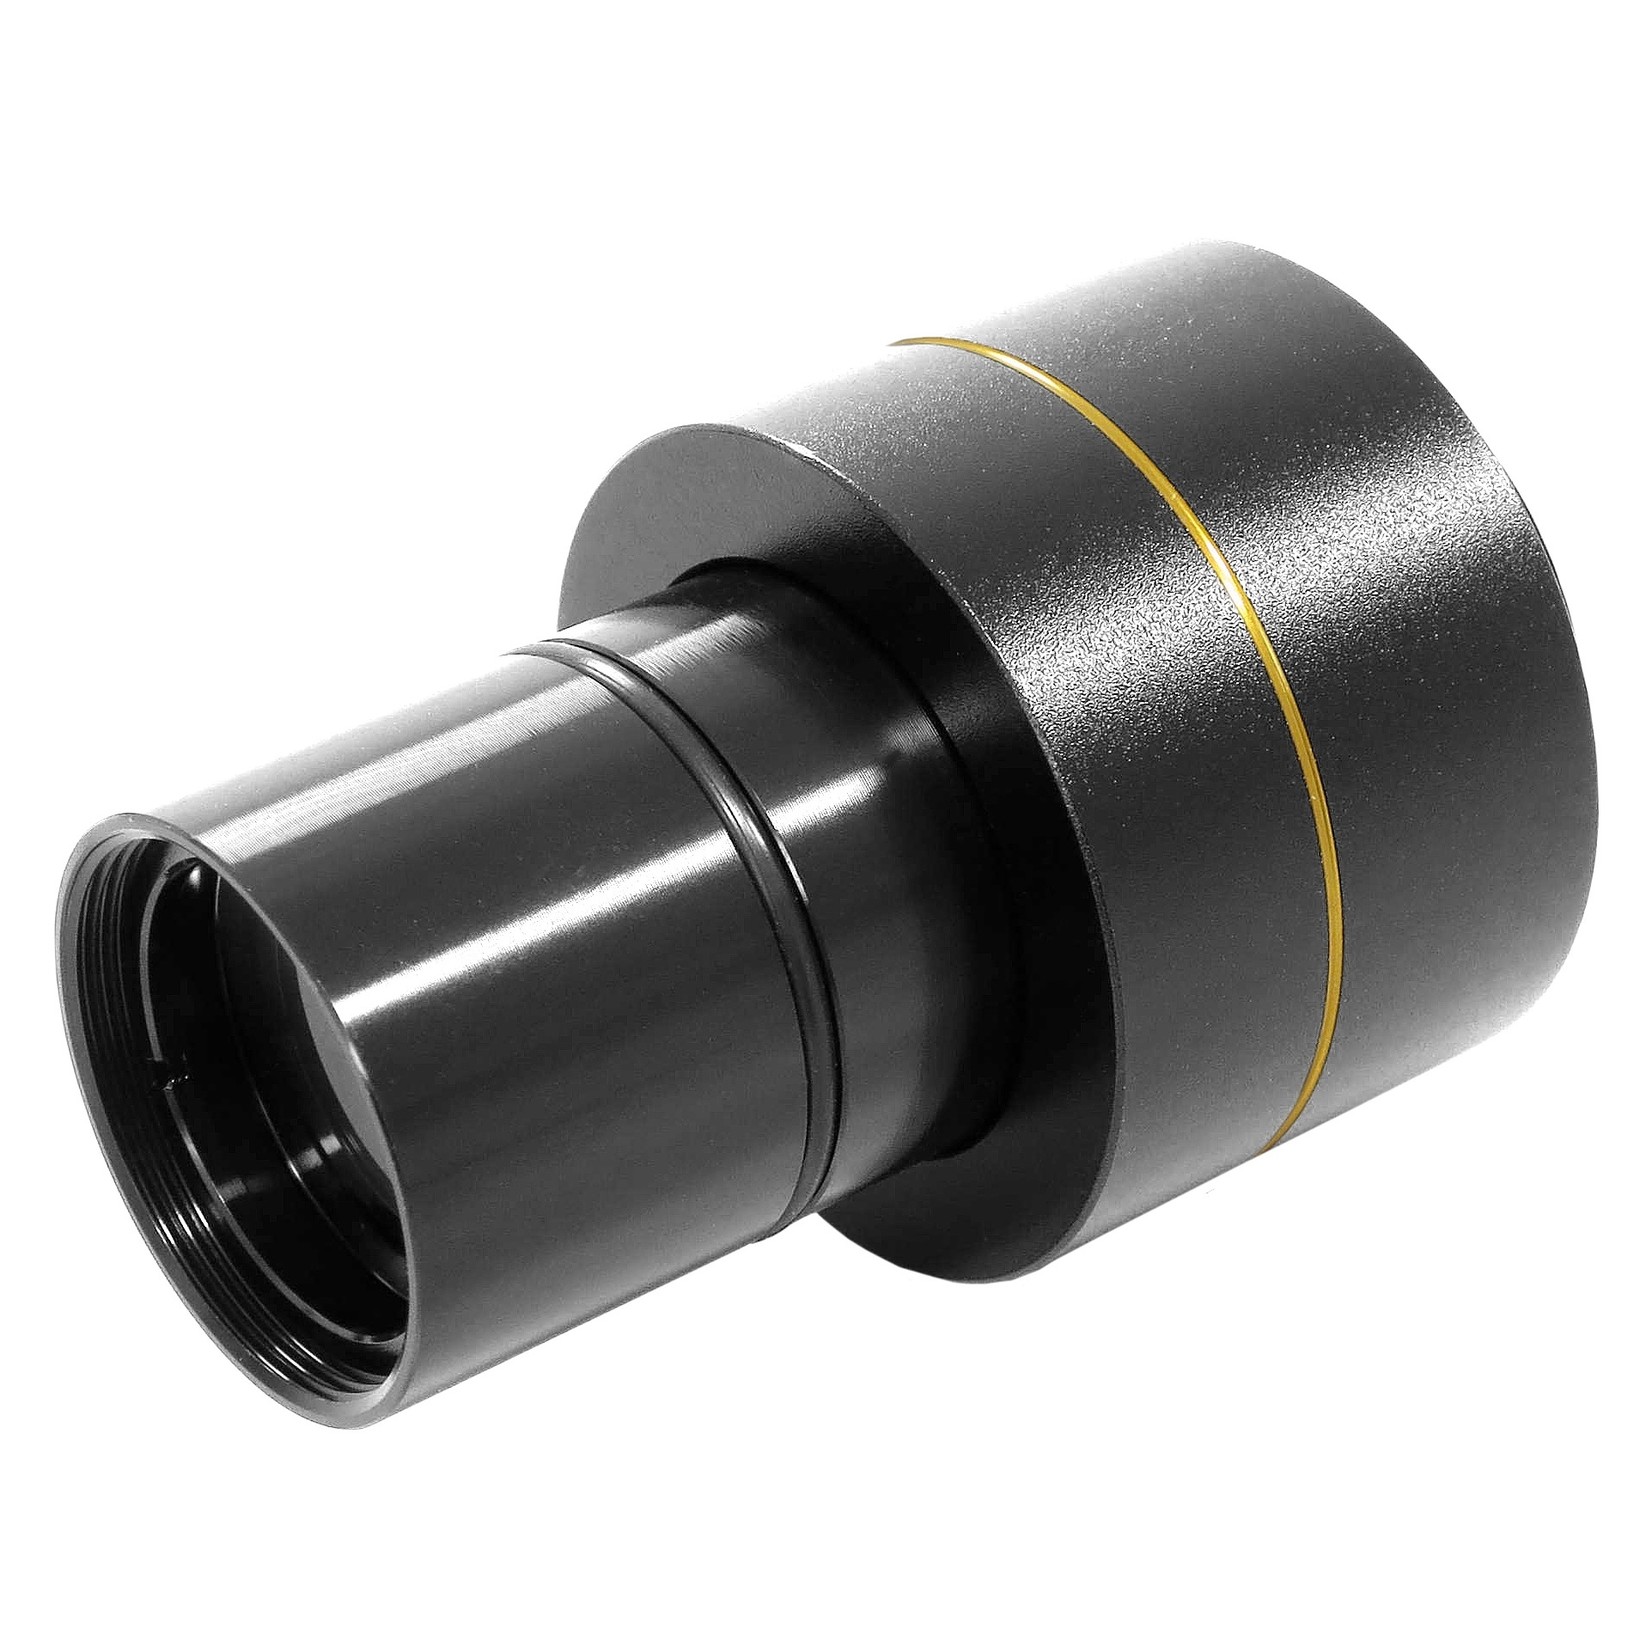 Eyepiece adapter for HDMI camera